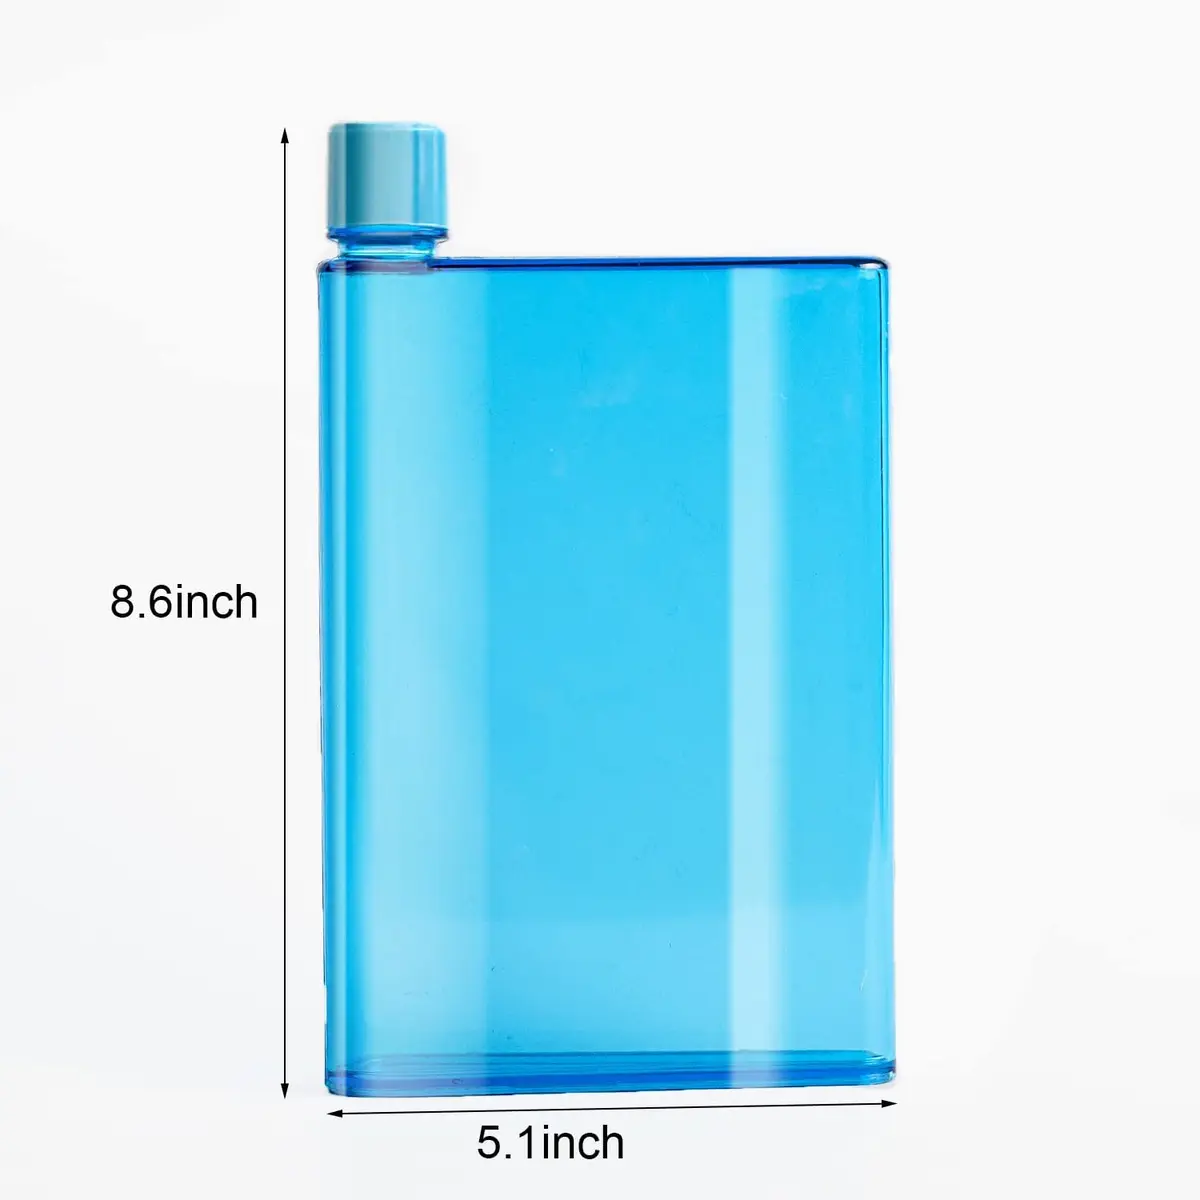 Reusable Slim Flat Water Bottle 420ml Portable - Fits in Pocket &Random Corner.Portable Cup for School,Sports, Travel, Dining Time